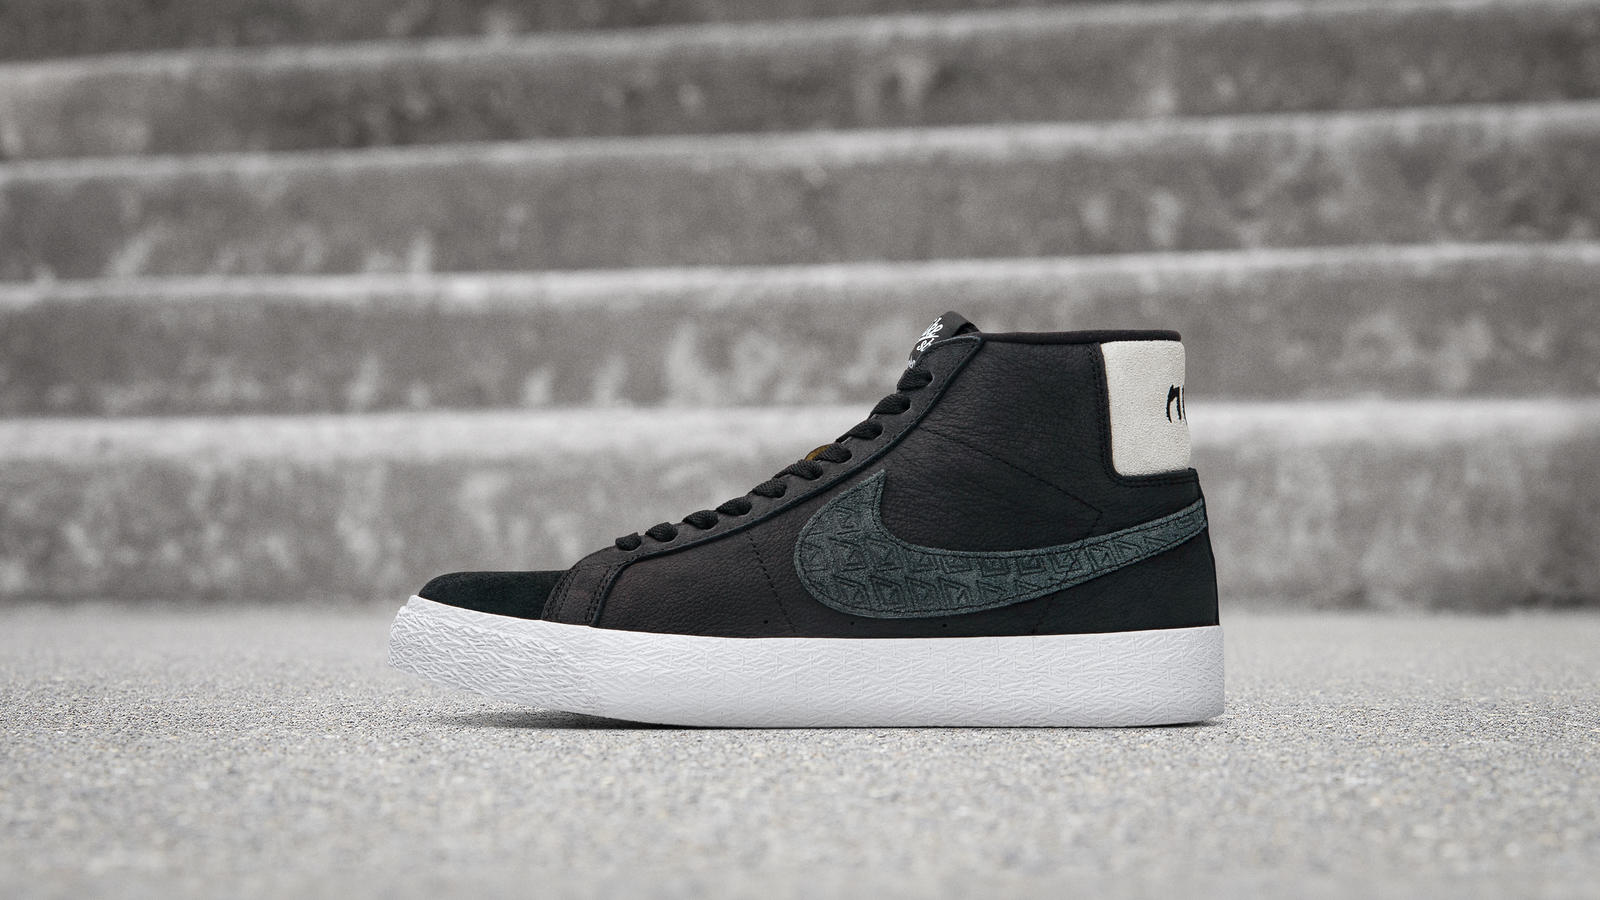 Nike SB Zoom Blazer Mid Gnarhunters Official Image and Release Date